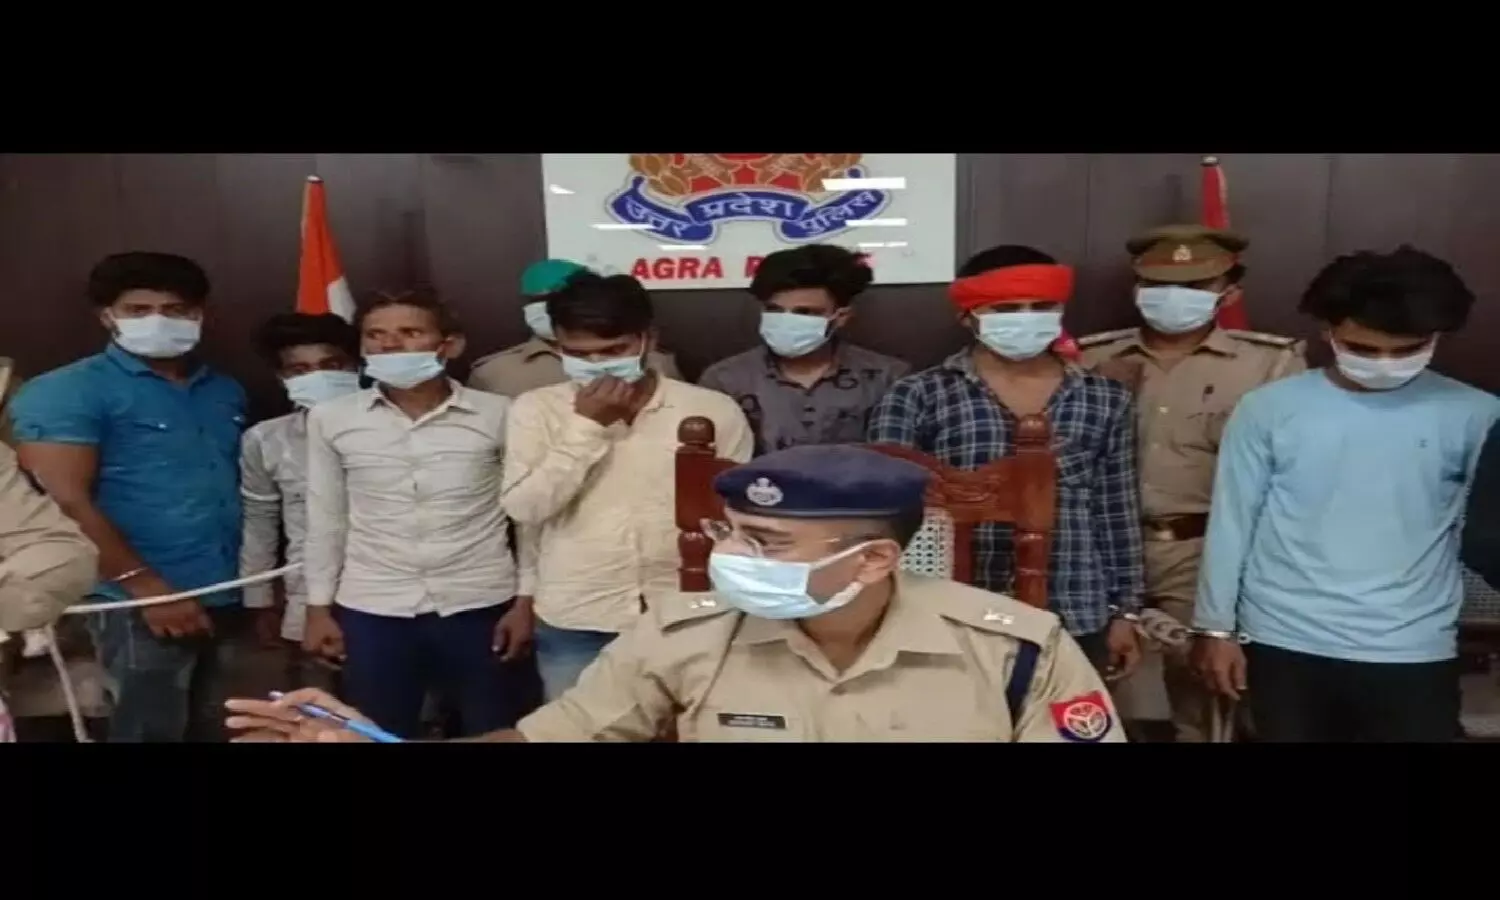 Agra Police has arrested 9 miscreants who carried out the theft and robbery